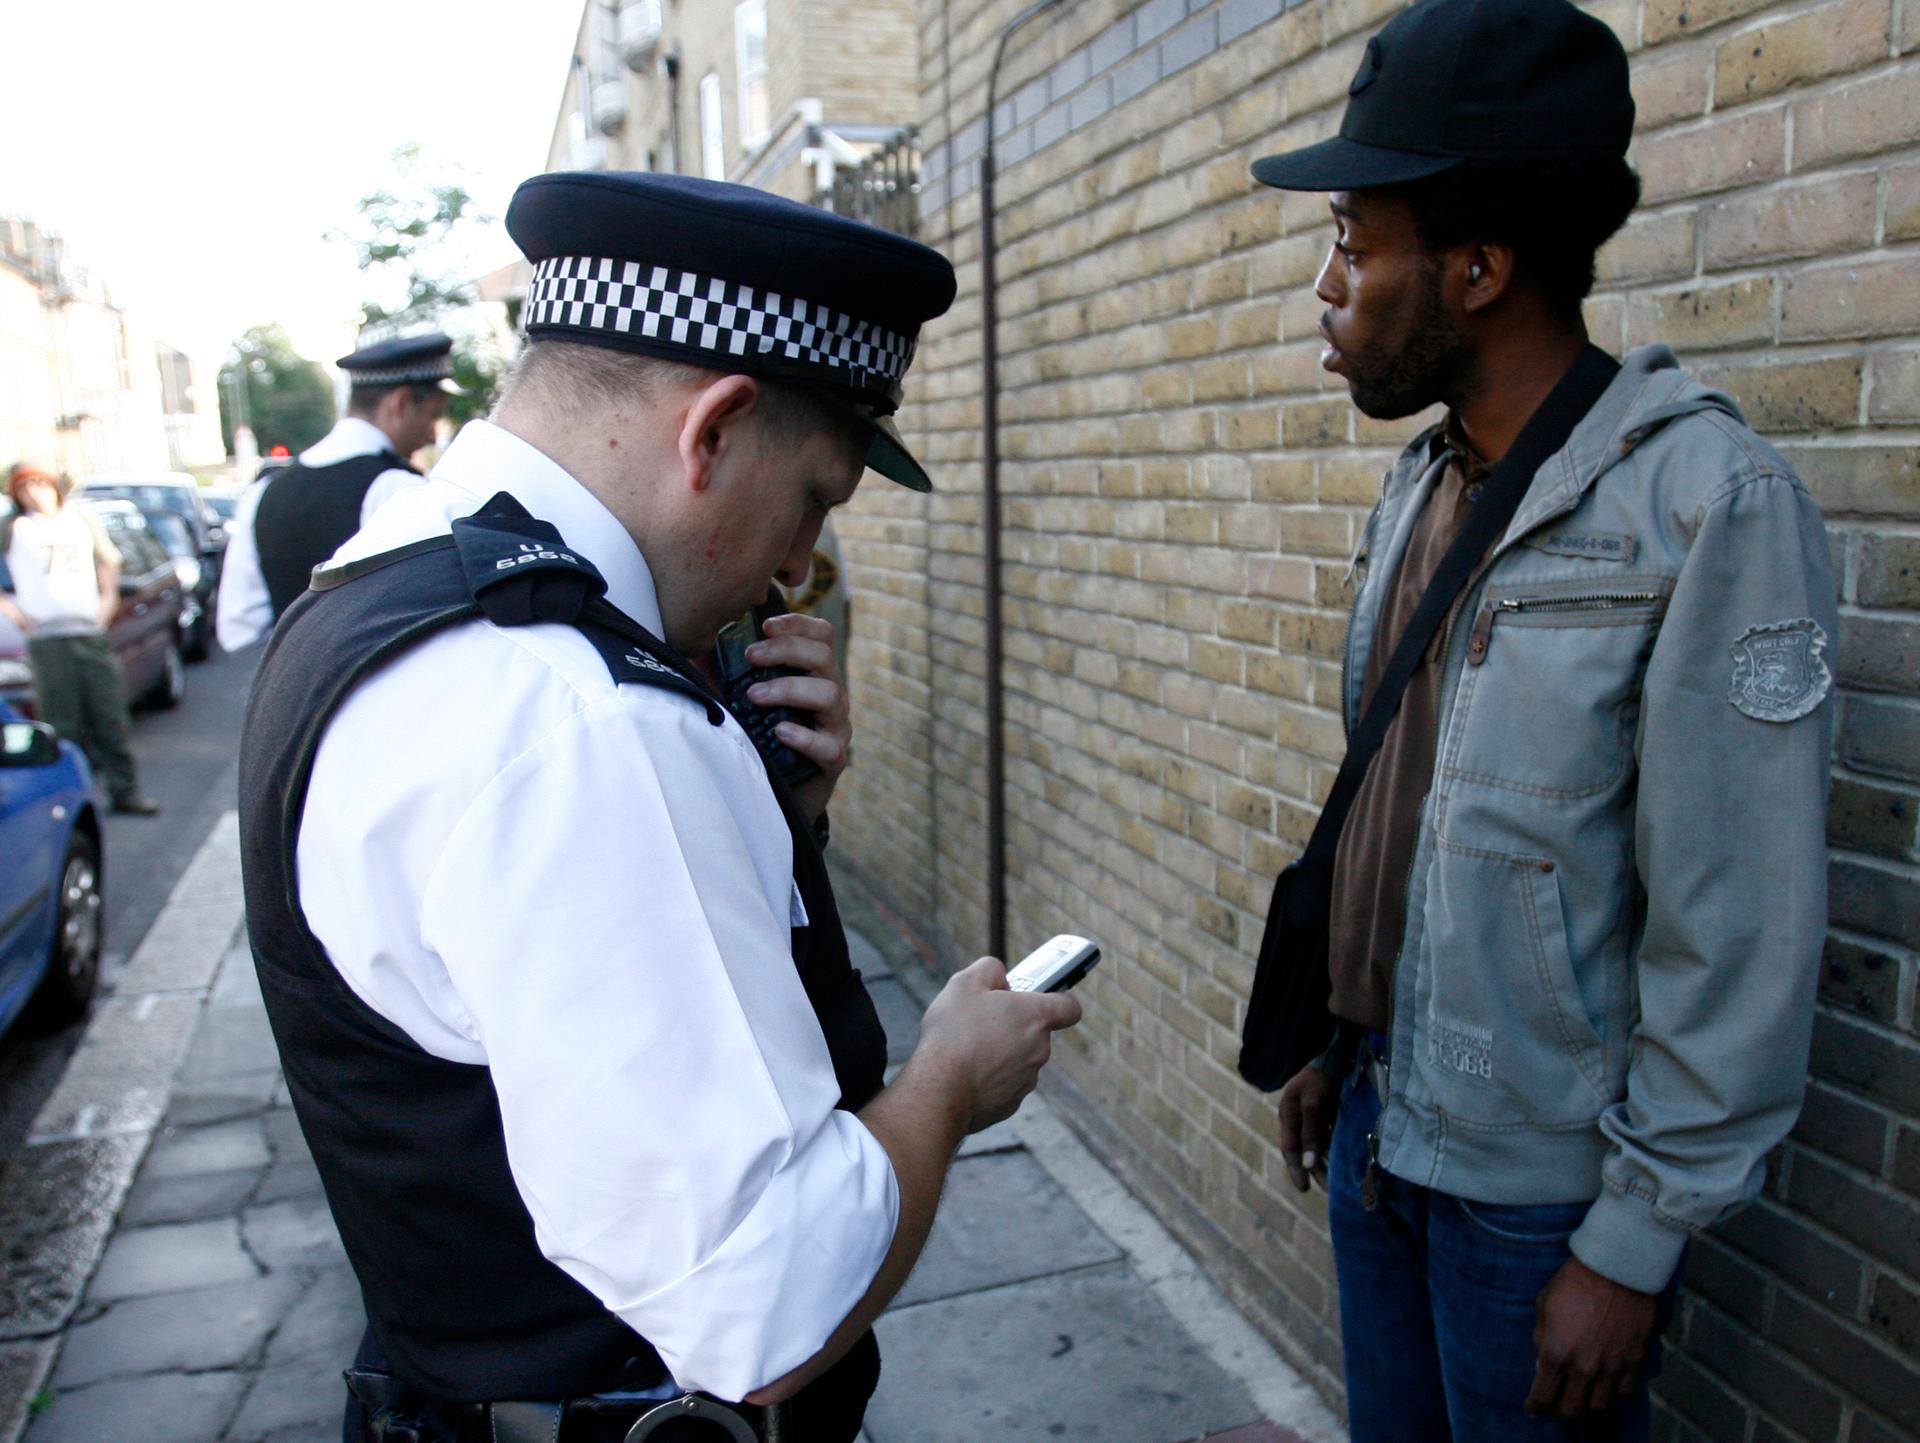 A police officer checks an man's mobile phone after stopping and searching him on a back street in the Brixton neighbourhood of London.